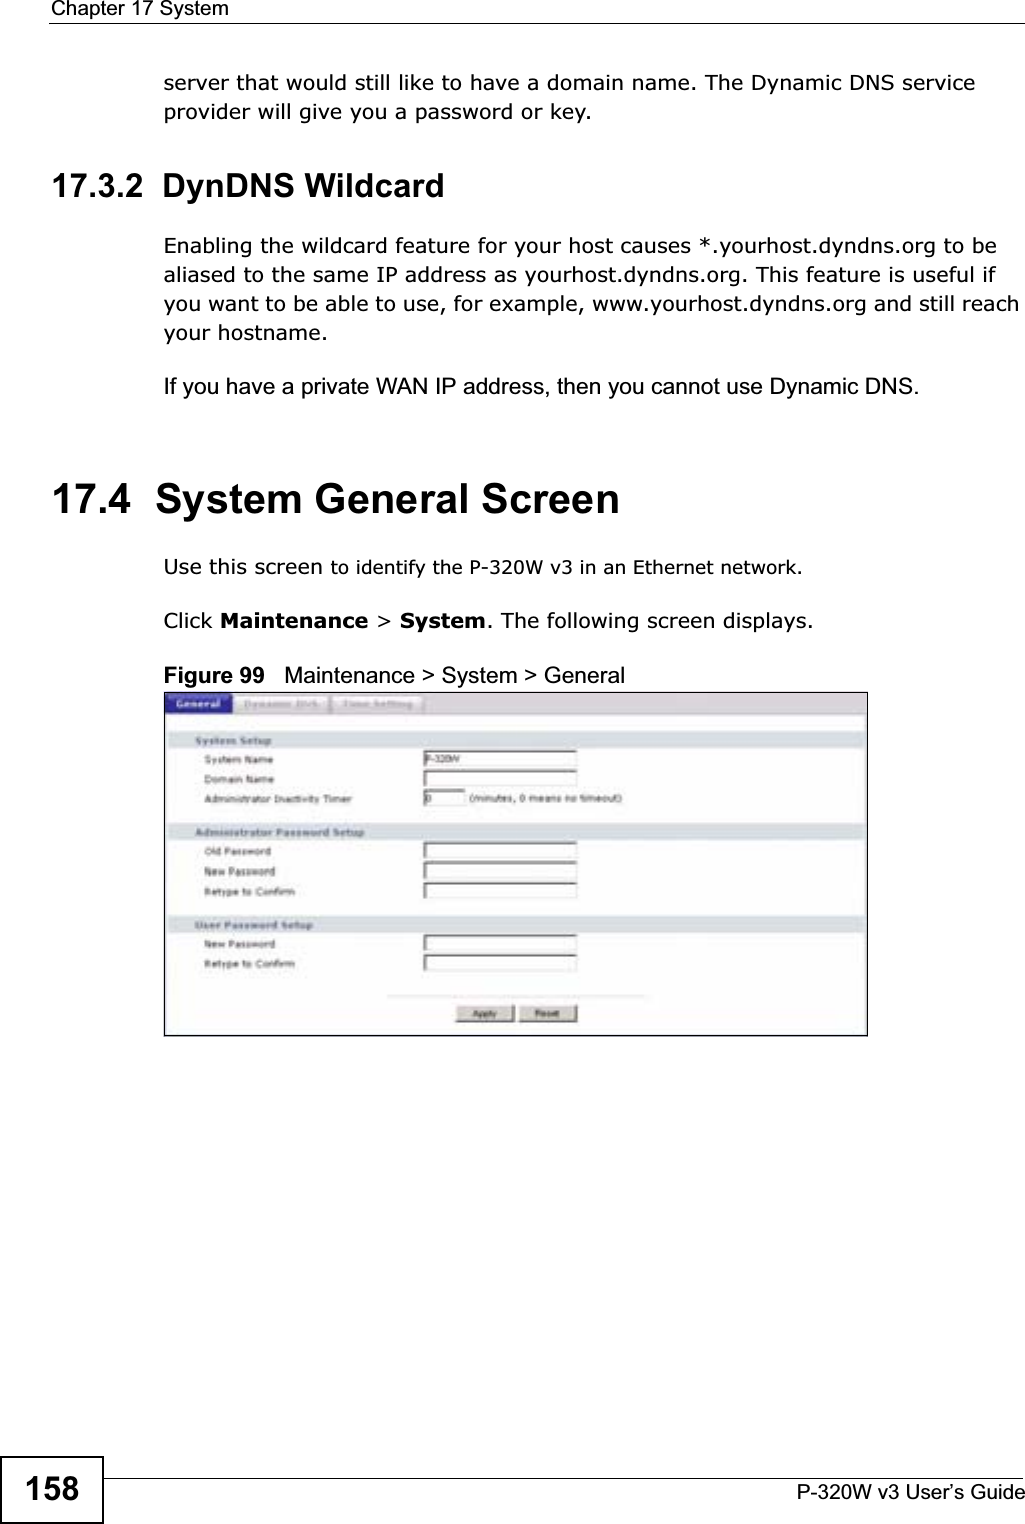 Chapter 17 SystemP-320W v3 User’s Guide158server that would still like to have a domain name. The Dynamic DNS service provider will give you a password or key.17.3.2  DynDNS Wildcard Enabling the wildcard feature for your host causes *.yourhost.dyndns.org to be aliased to the same IP address as yourhost.dyndns.org. This feature is useful if you want to be able to use, for example, www.yourhost.dyndns.org and still reach your hostname.If you have a private WAN IP address, then you cannot use Dynamic DNS.17.4  System General Screen Use this screen to identify the P-320W v3 in an Ethernet network.Click Maintenance &gt; System. The following screen displays.Figure 99   Maintenance &gt; System &gt; General 